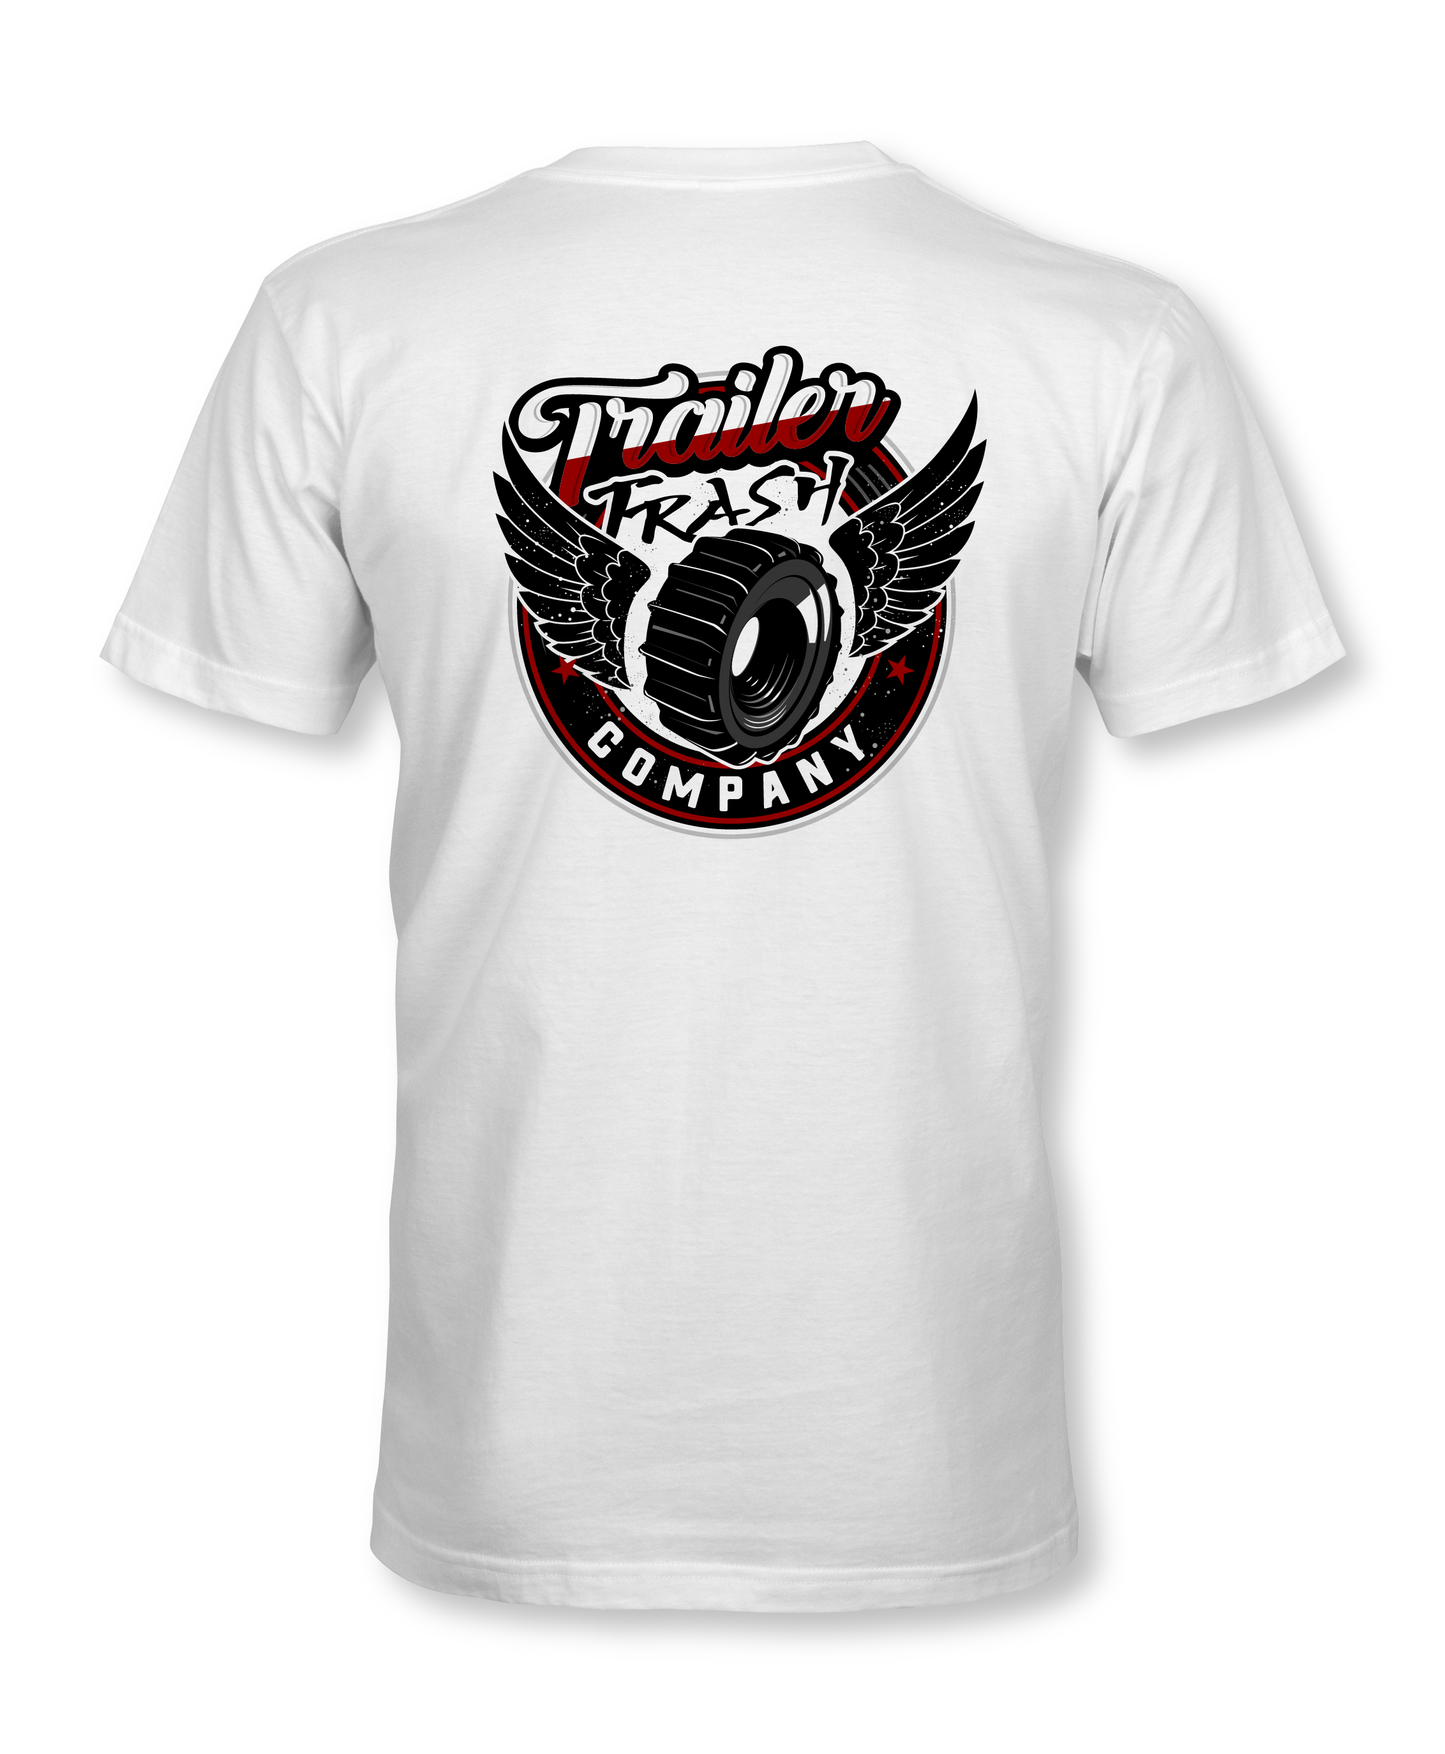 OG Paddle Tire with wings T Shirt